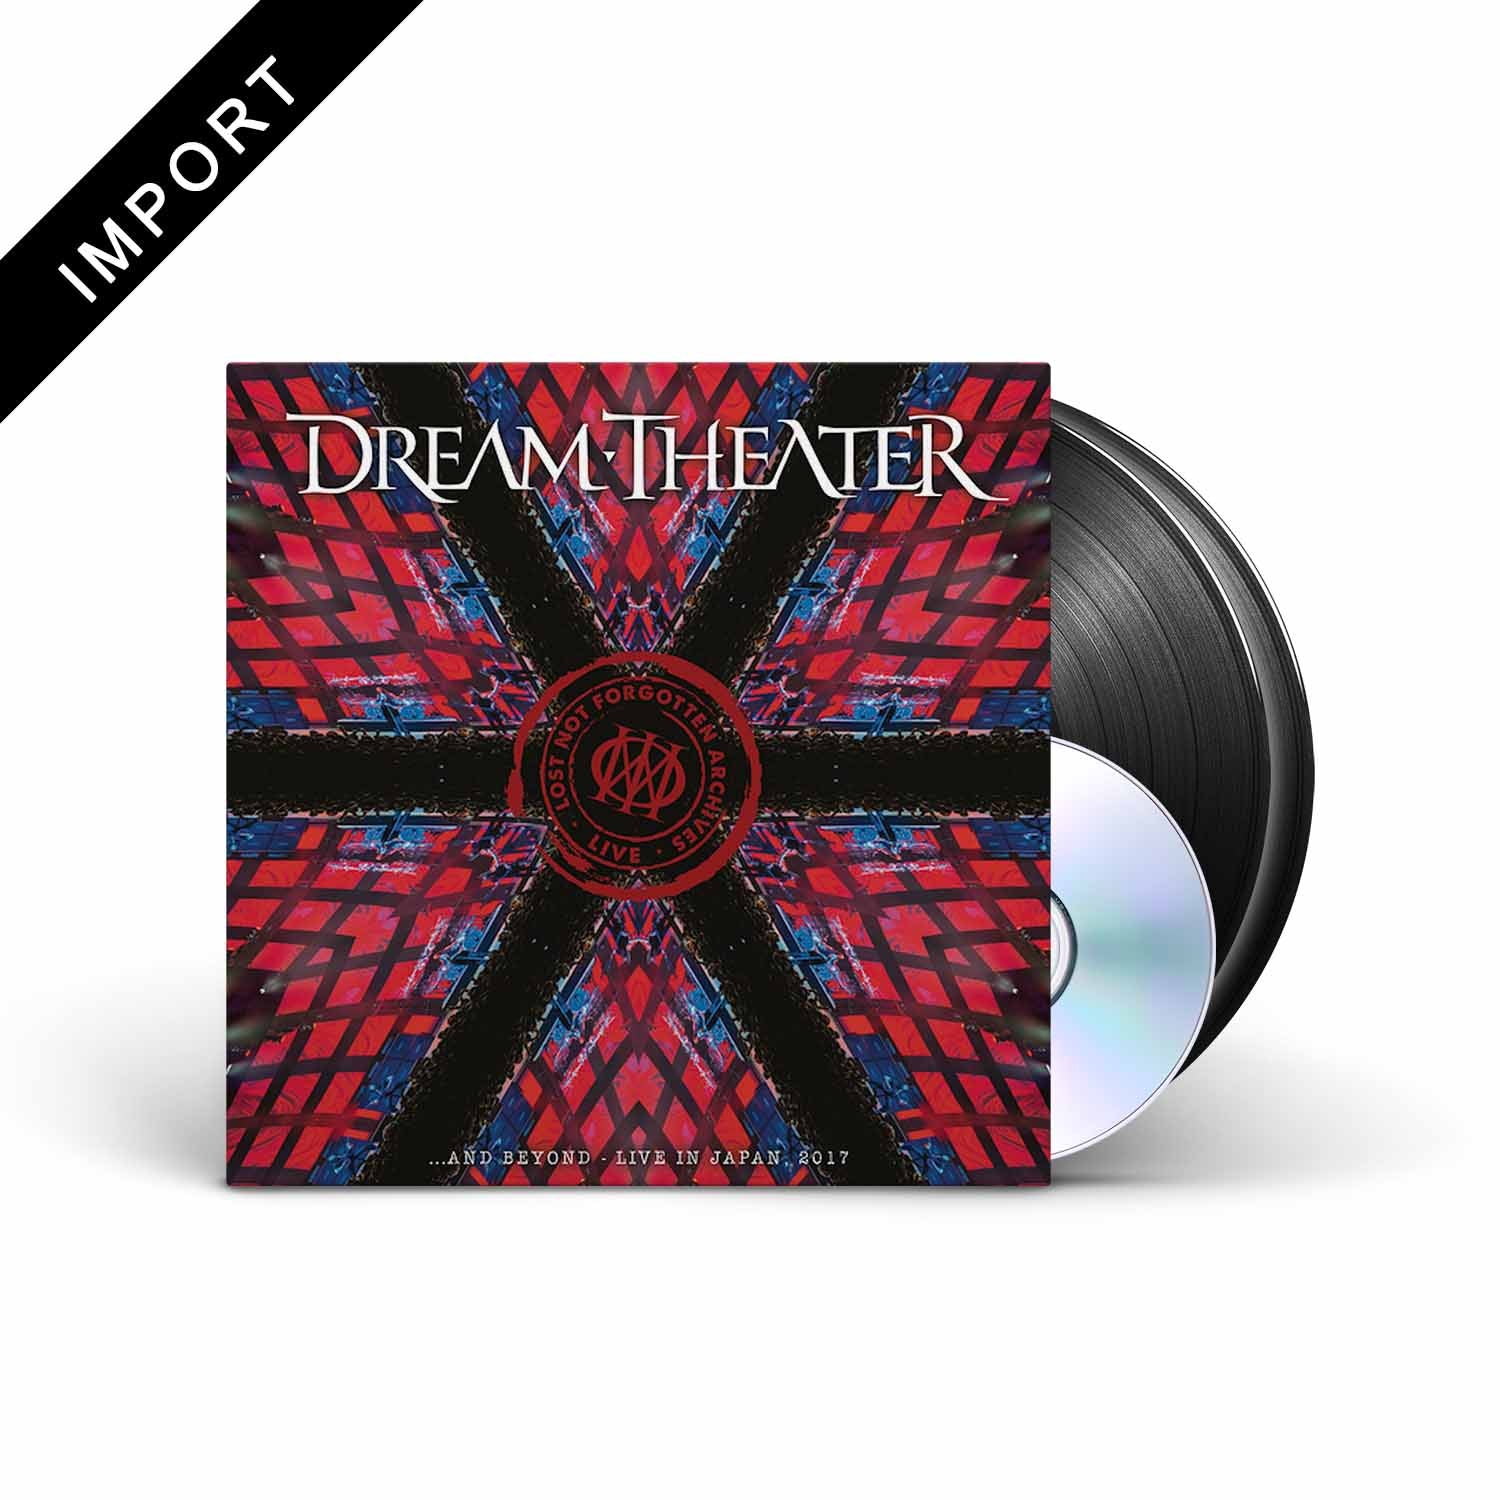 DREAM THEATER - Lost Not Forgotten Archives: ...and Beyond - Live in Japan, 2017 - 2xLP + CD